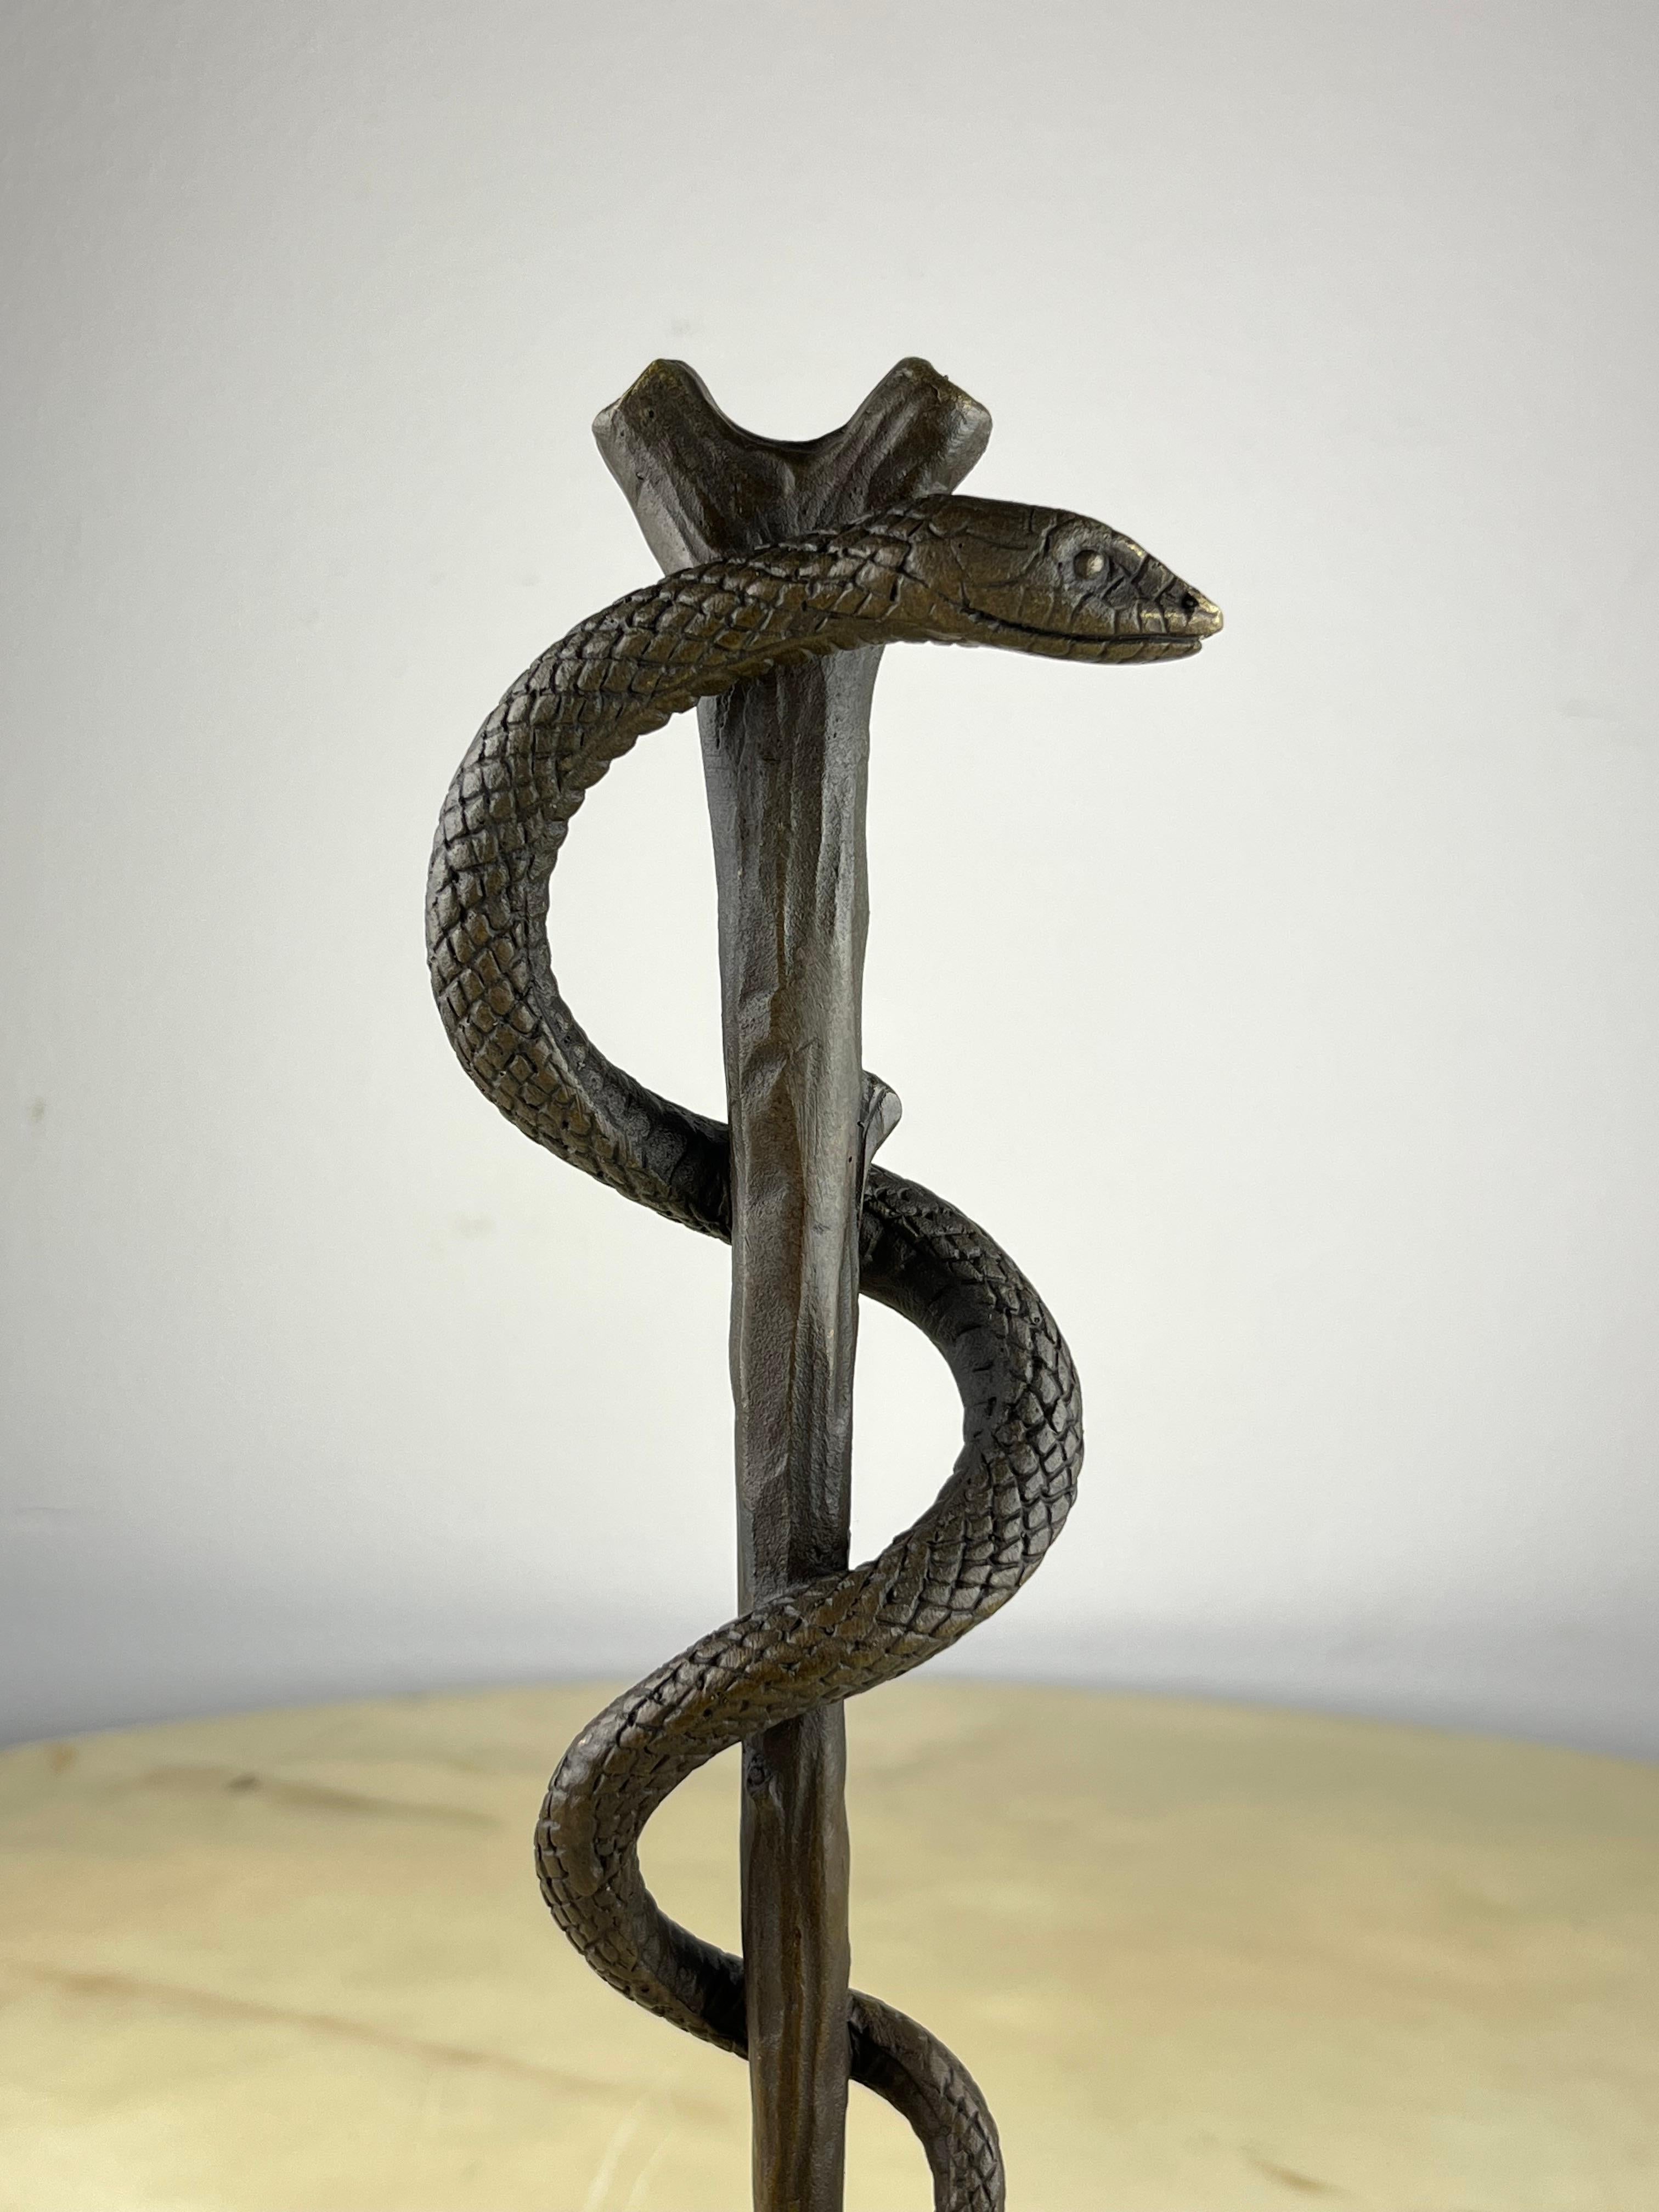 Bronze and marble rod of Aesculapius, France, 1990s
It is an ancient Greek symbol associated with medicine. It consists of a snake coiled around a rod. It symbolizes the health arts, combining the snake – which with the change of skin represents